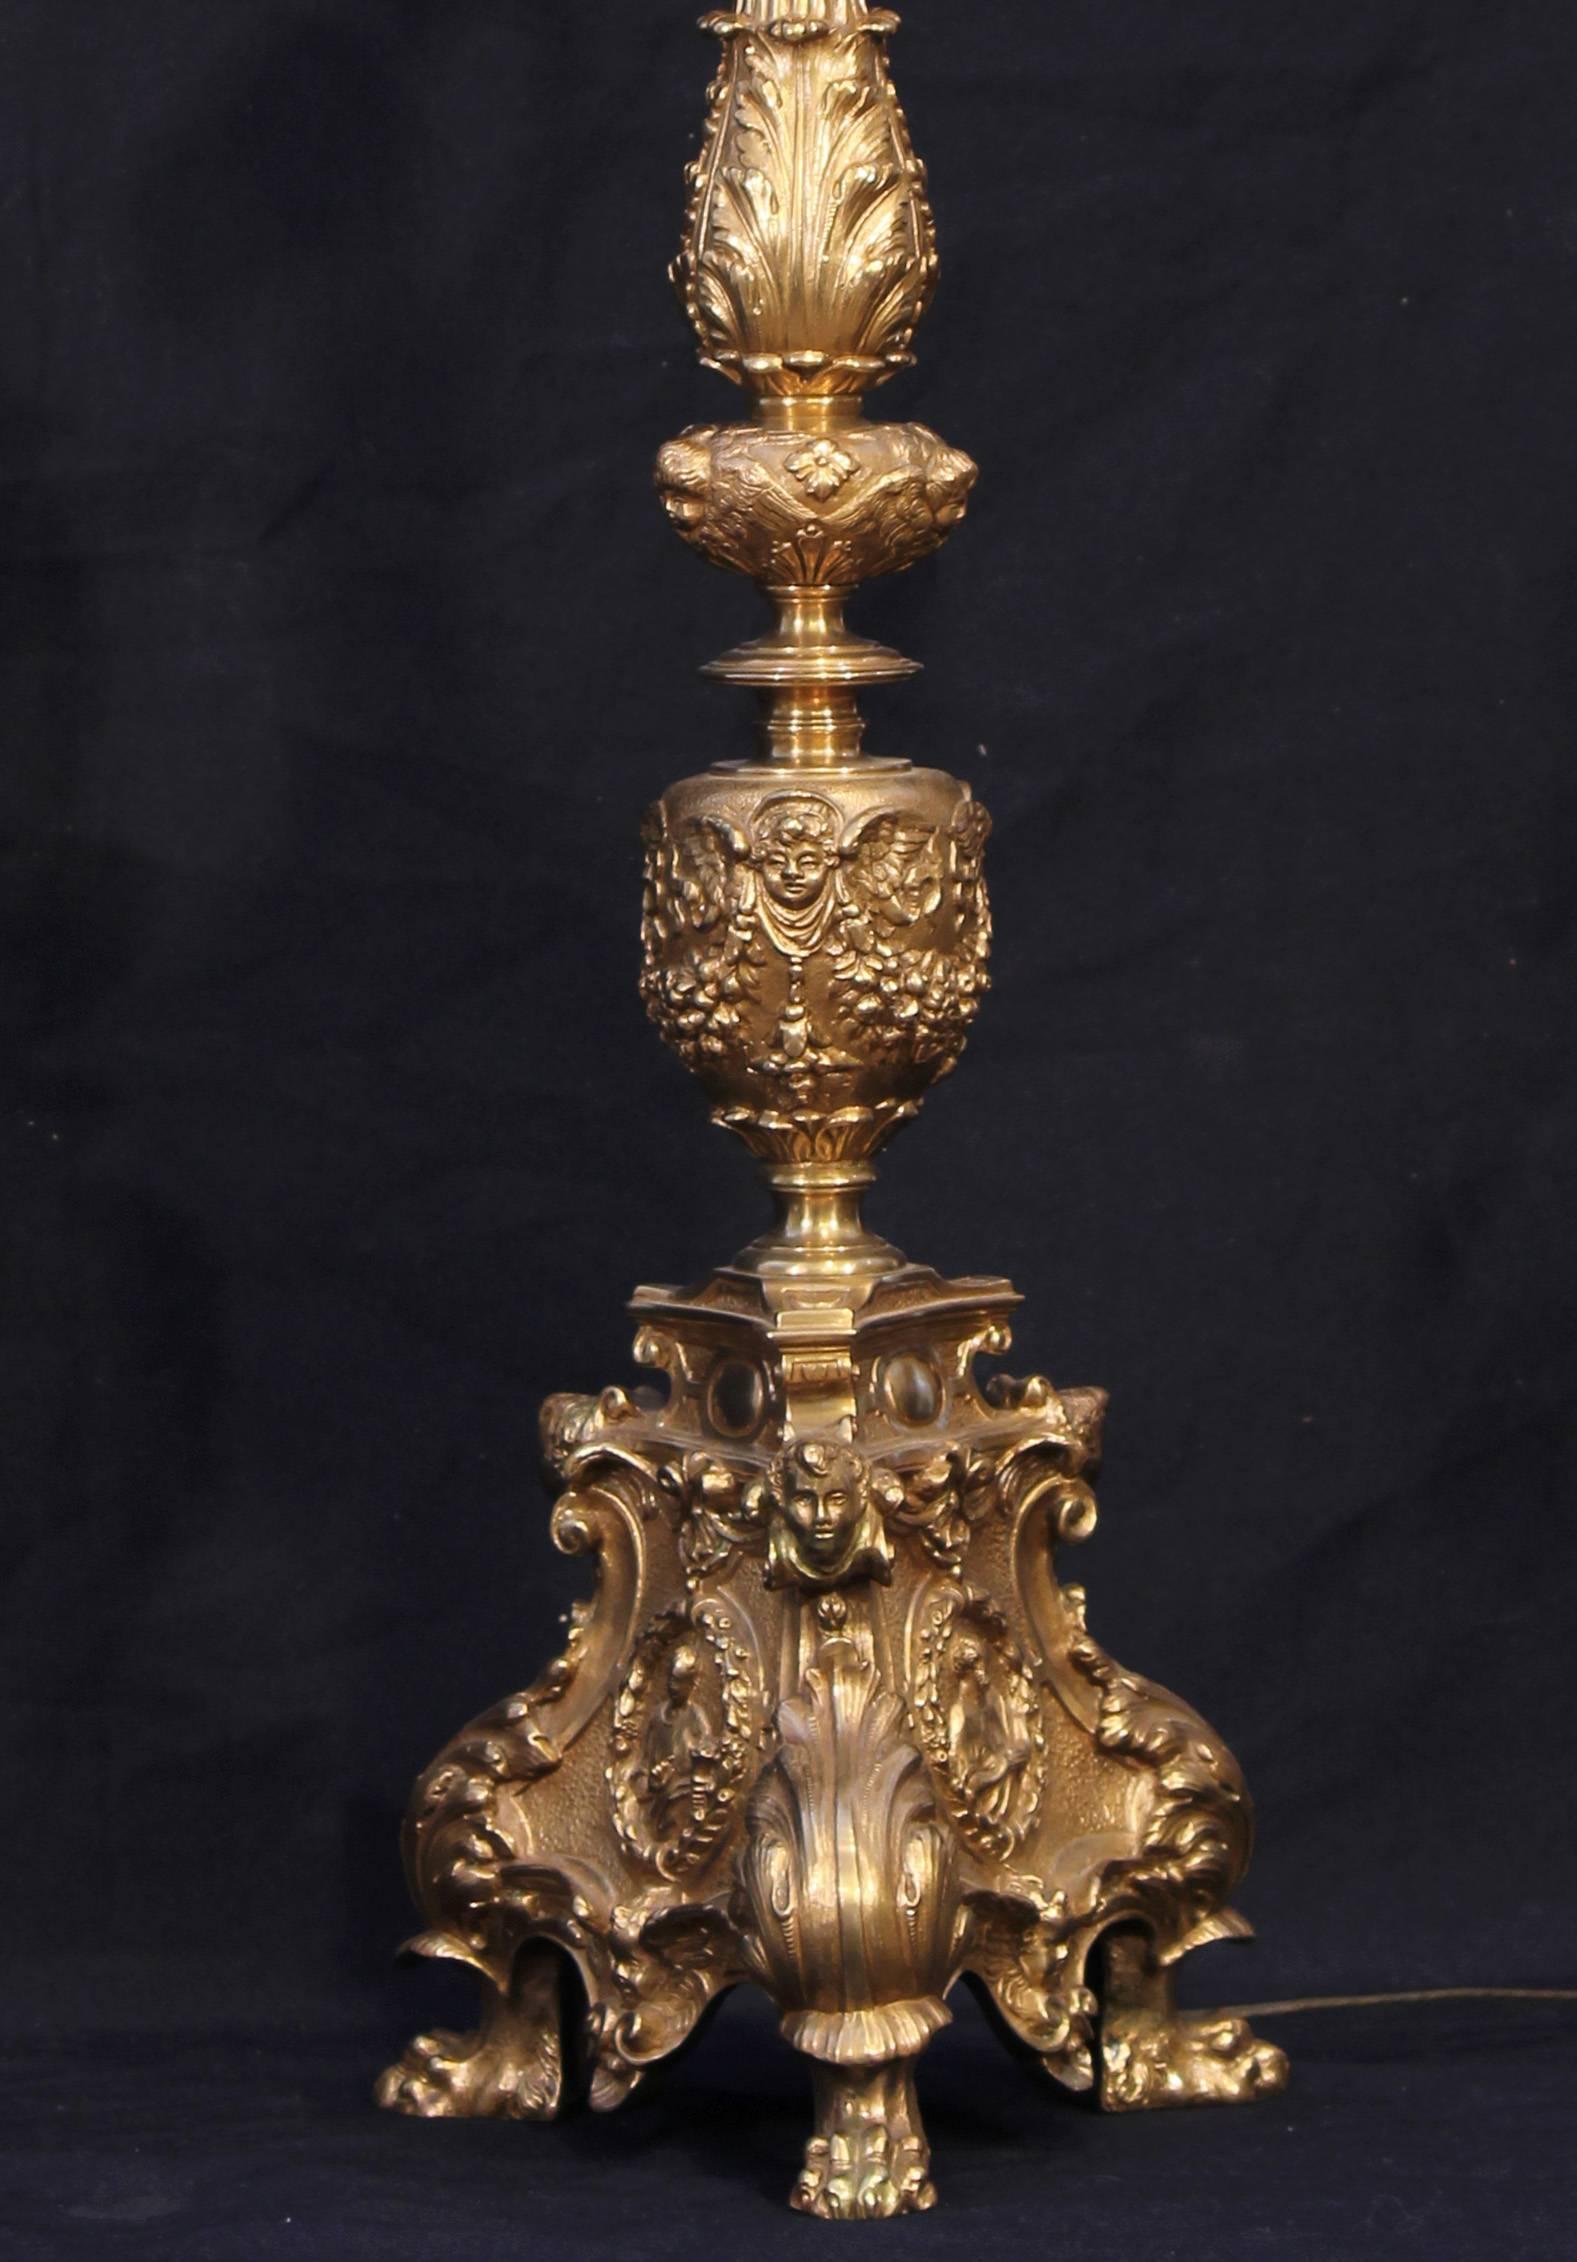 Large antique Polished bronze Baroque style pricket table  lamp. Excellent quality. Very sturdy. By E.F. Caldell.